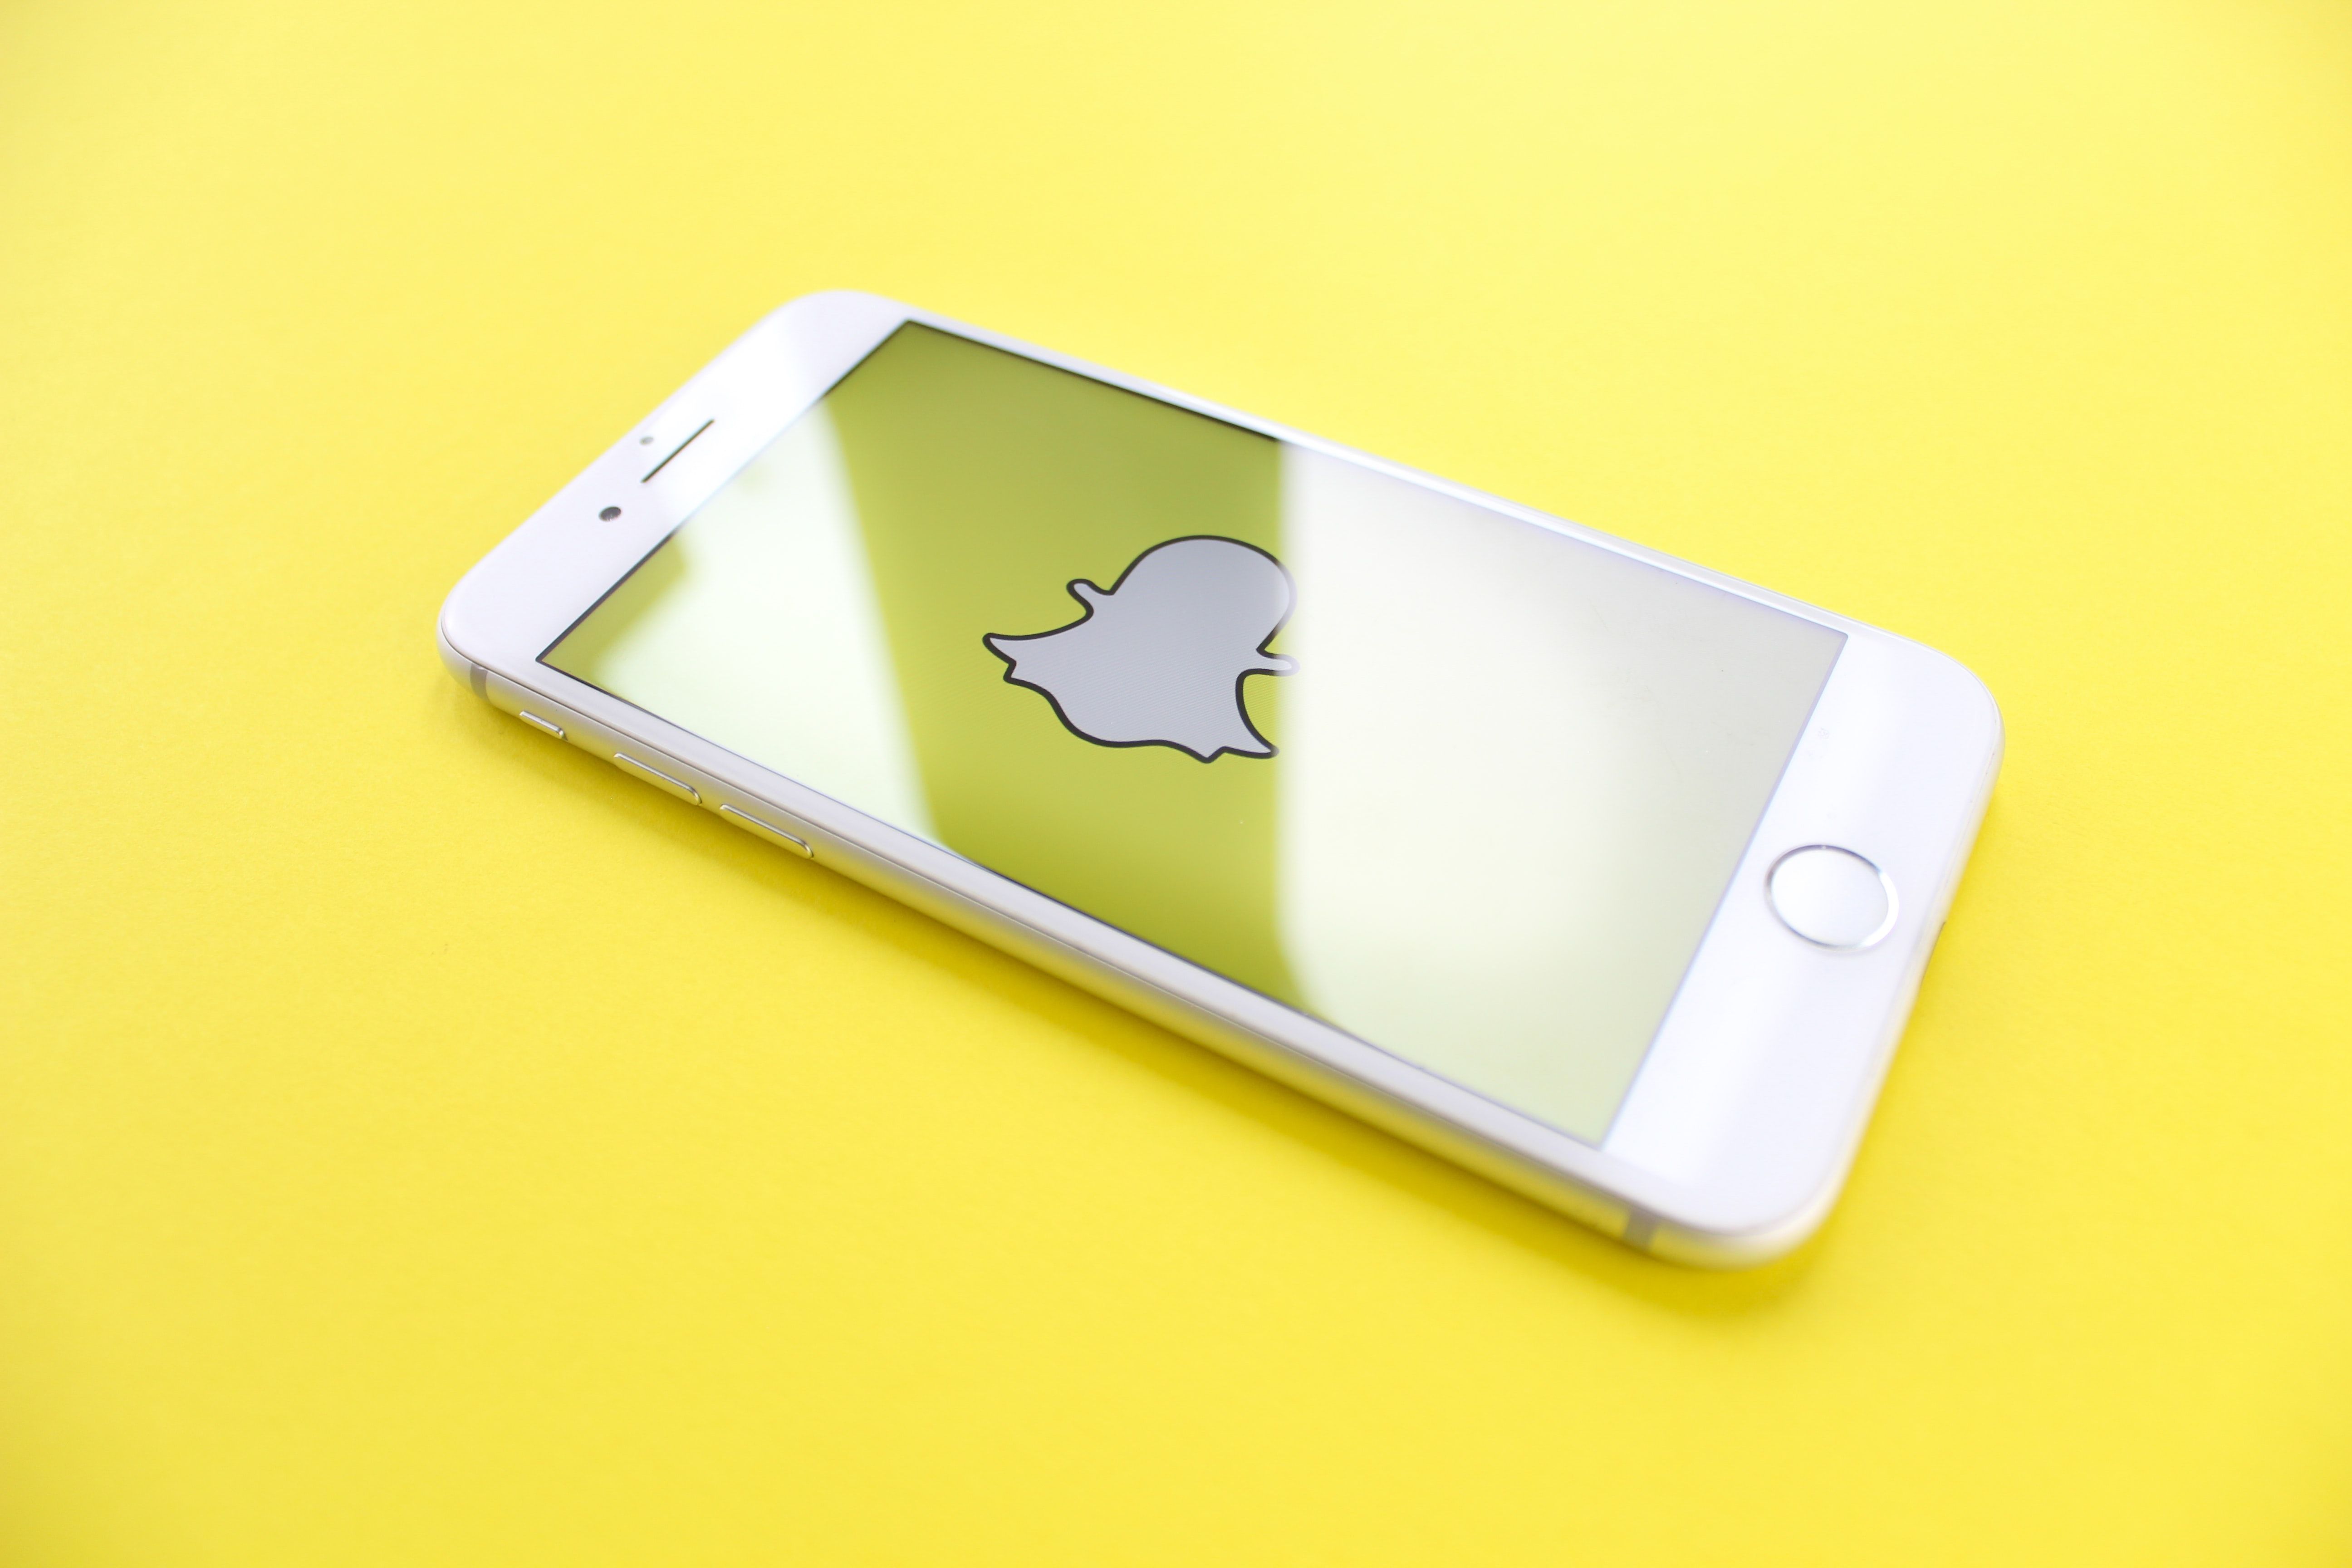 Photo of an iPhone showing the Snapchat logo